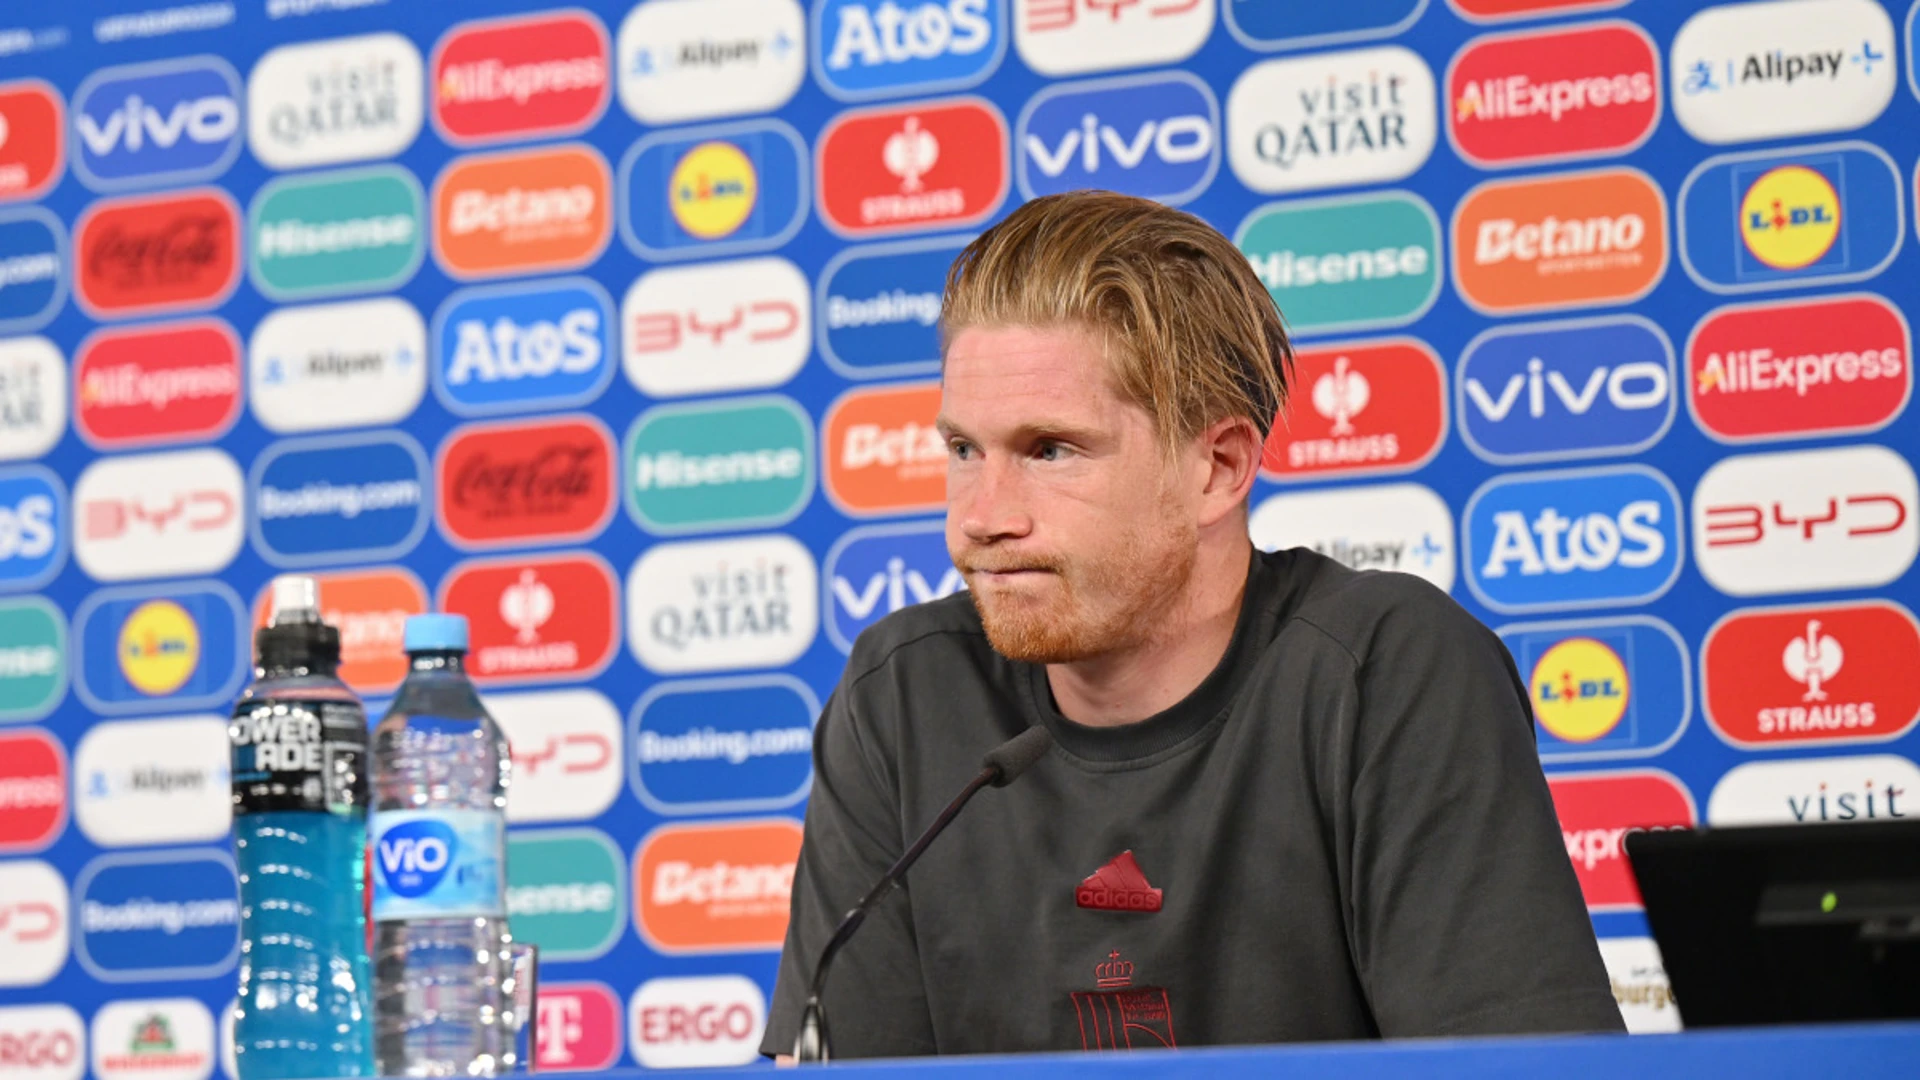 De Bruyne sidesteps questions over fans' boos after Euro draw